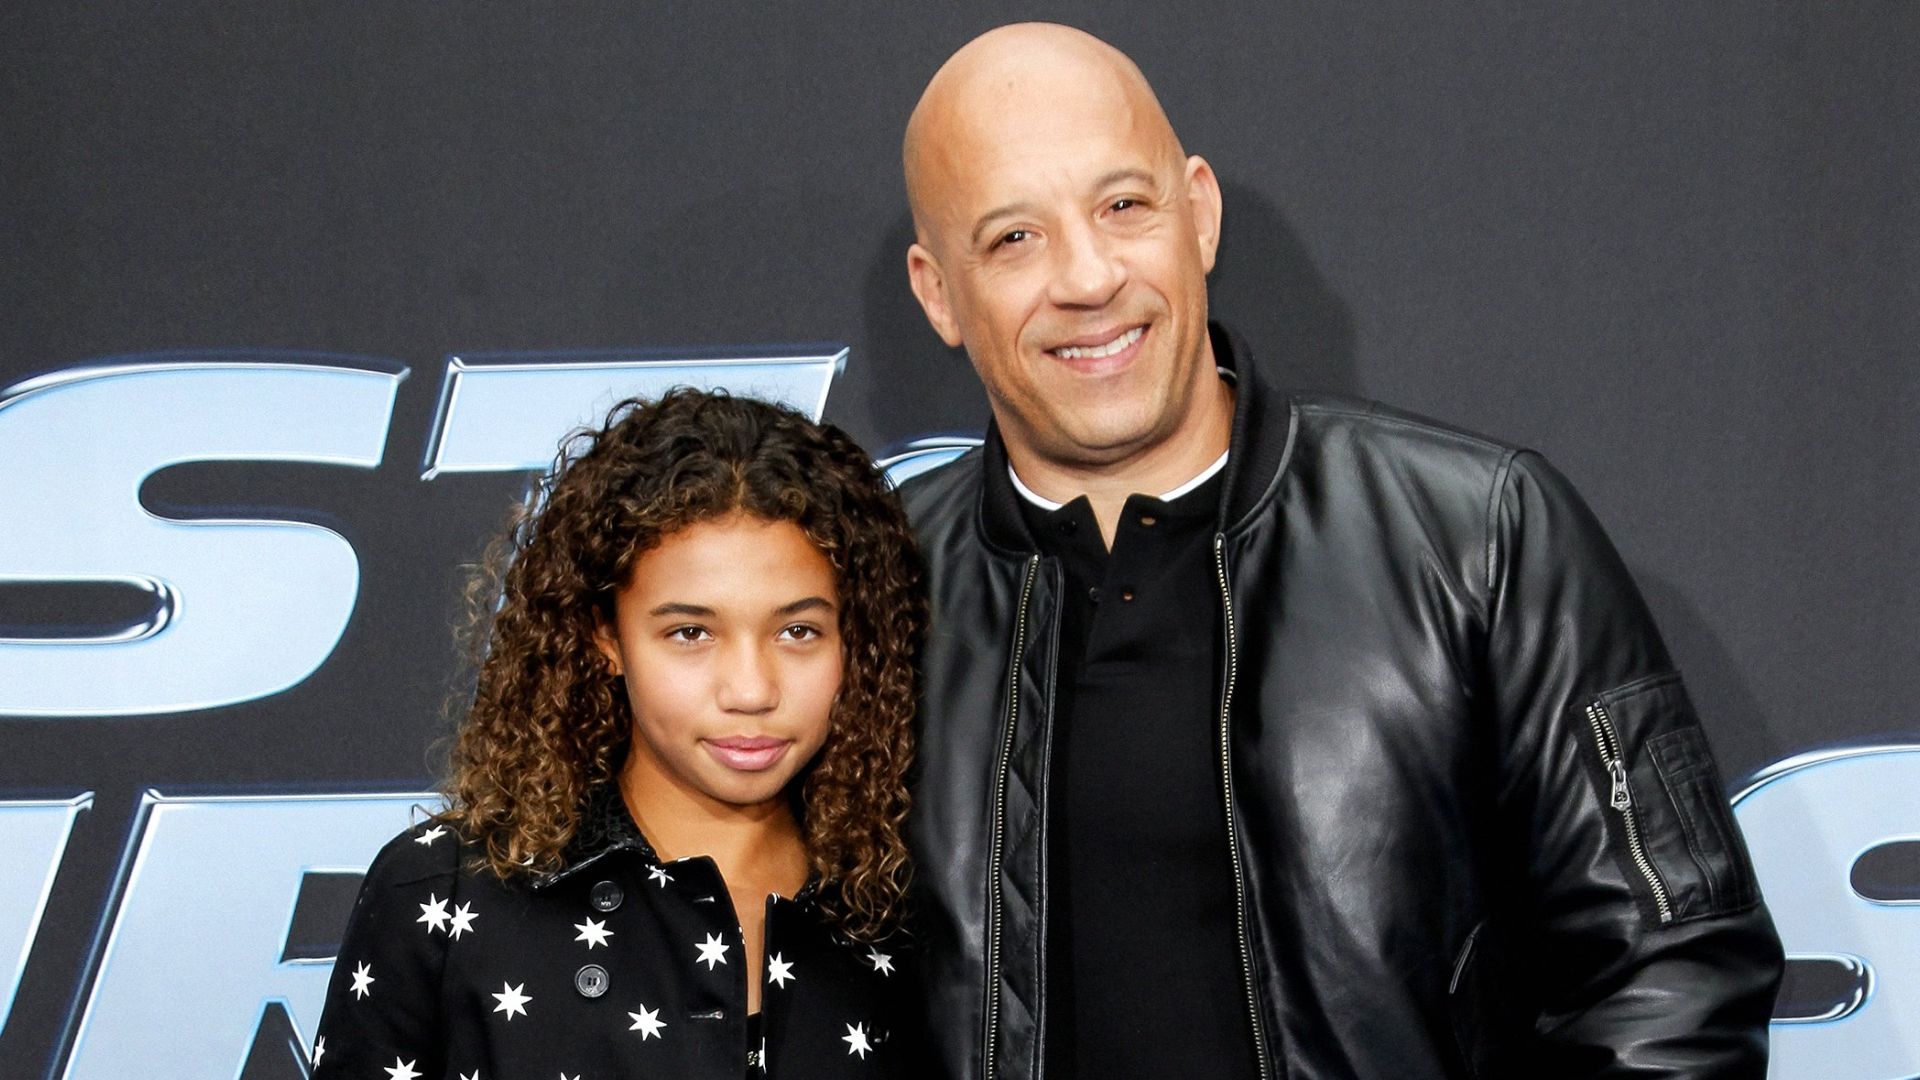 Hania Riley Sinclair And Her Father In Black Outfir At Movie Promo